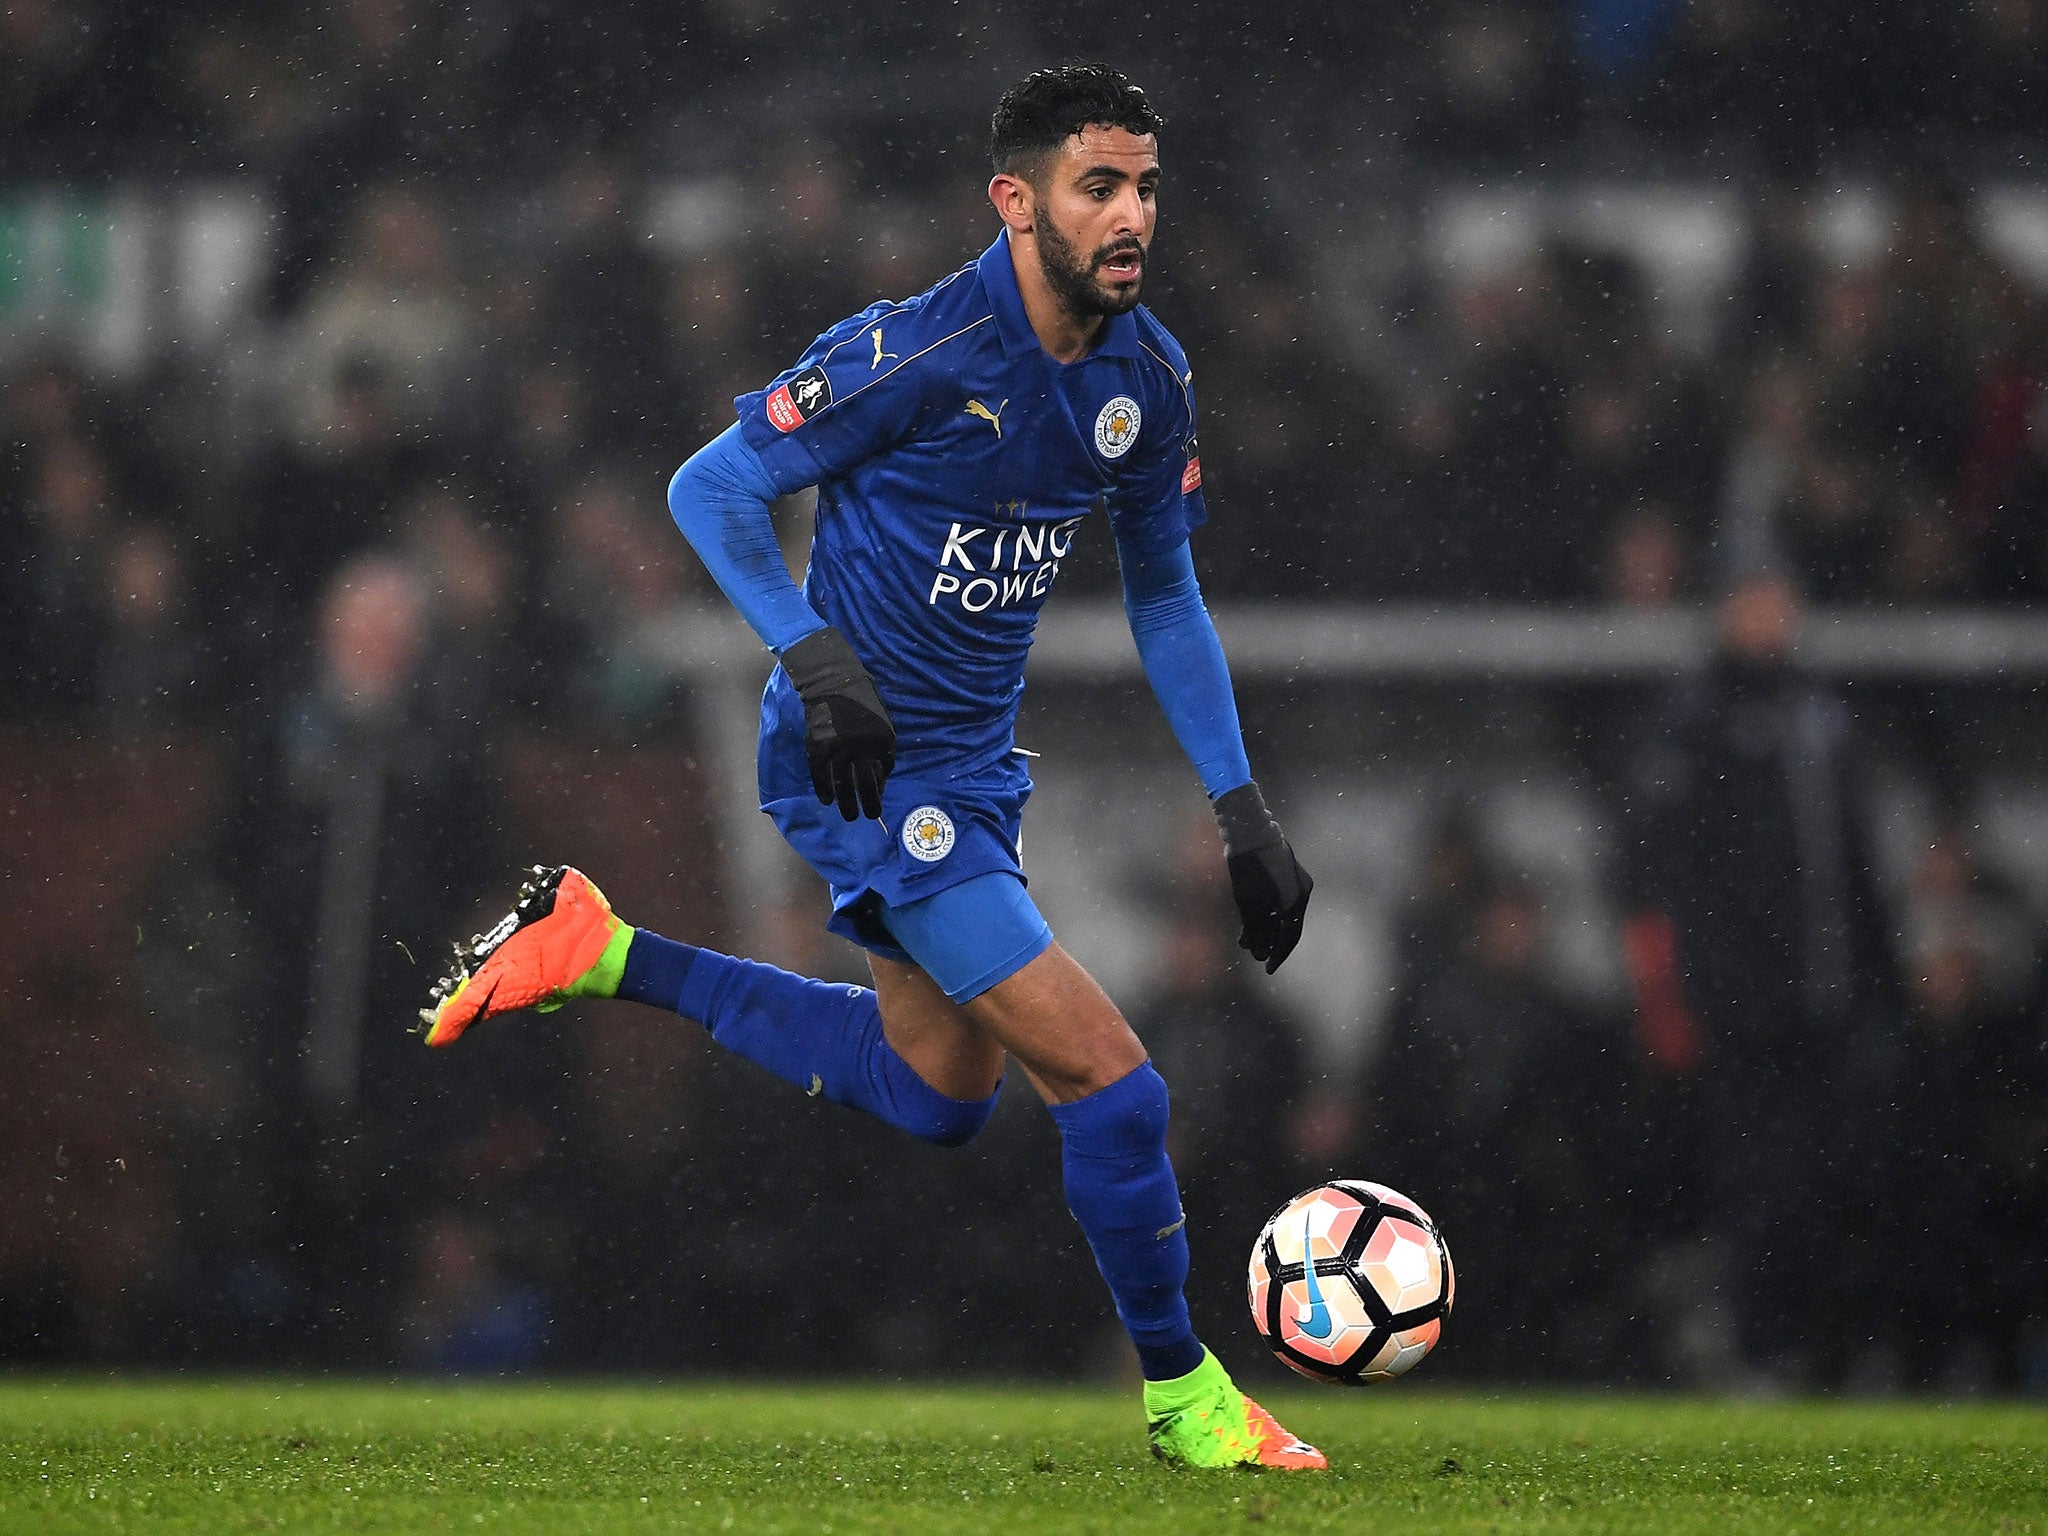 Mahrez and Co play their first game on Monday night since Claudio Ranieri was sacked last Thursday